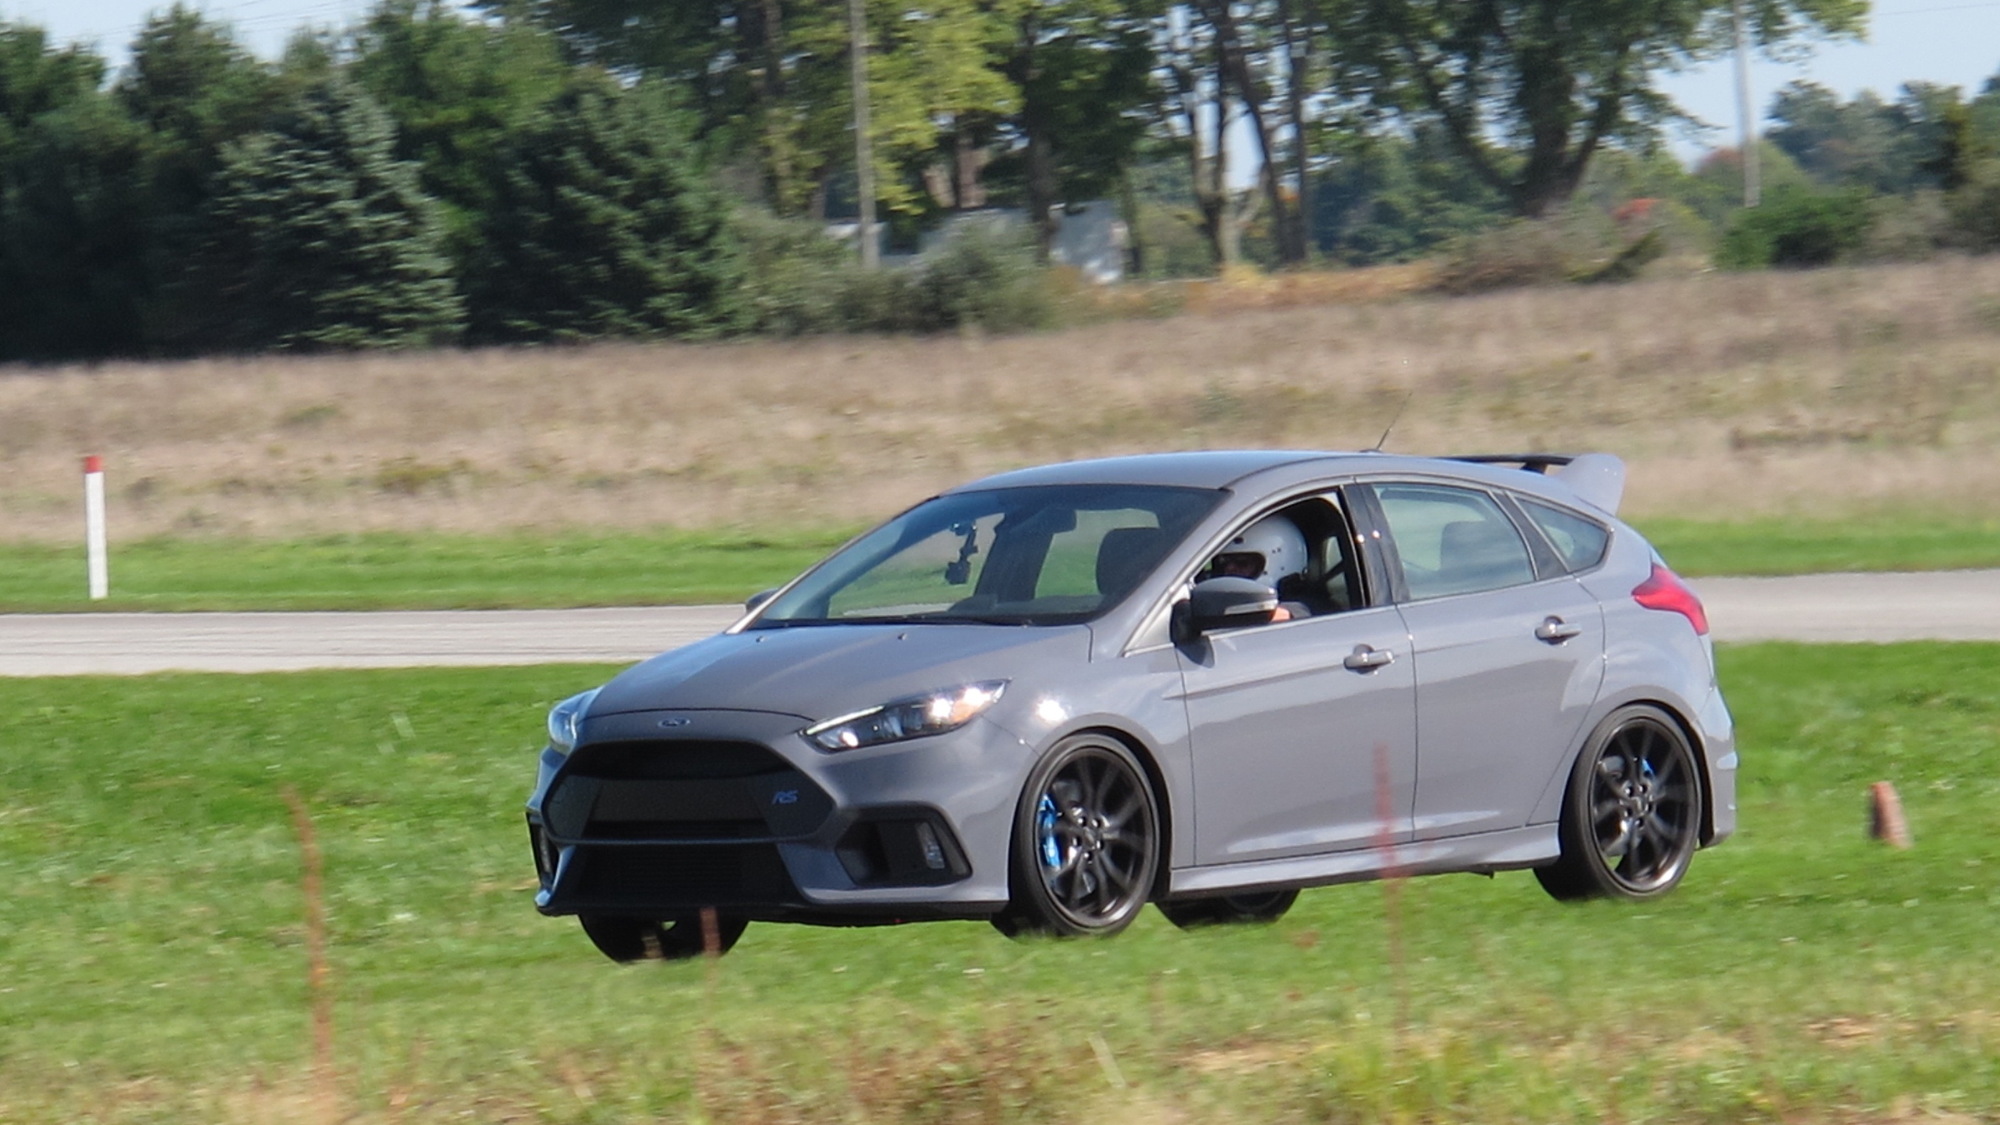 2016 Ford Focus RS at Gingerman Raceway, October 2016